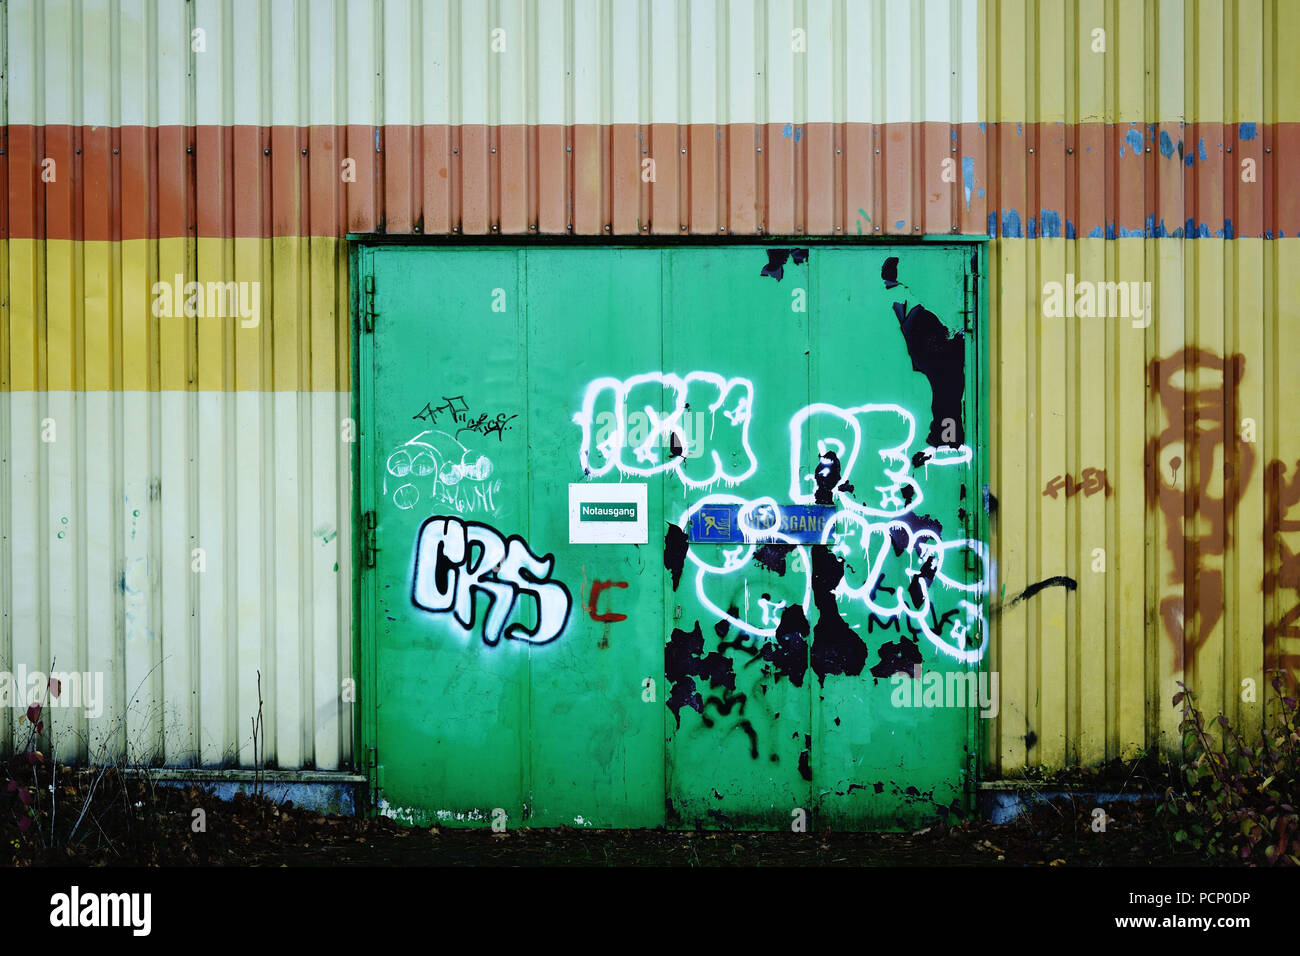 A painted steel door with graffiti rather than a fireproof door and emergency exit. Stock Photo